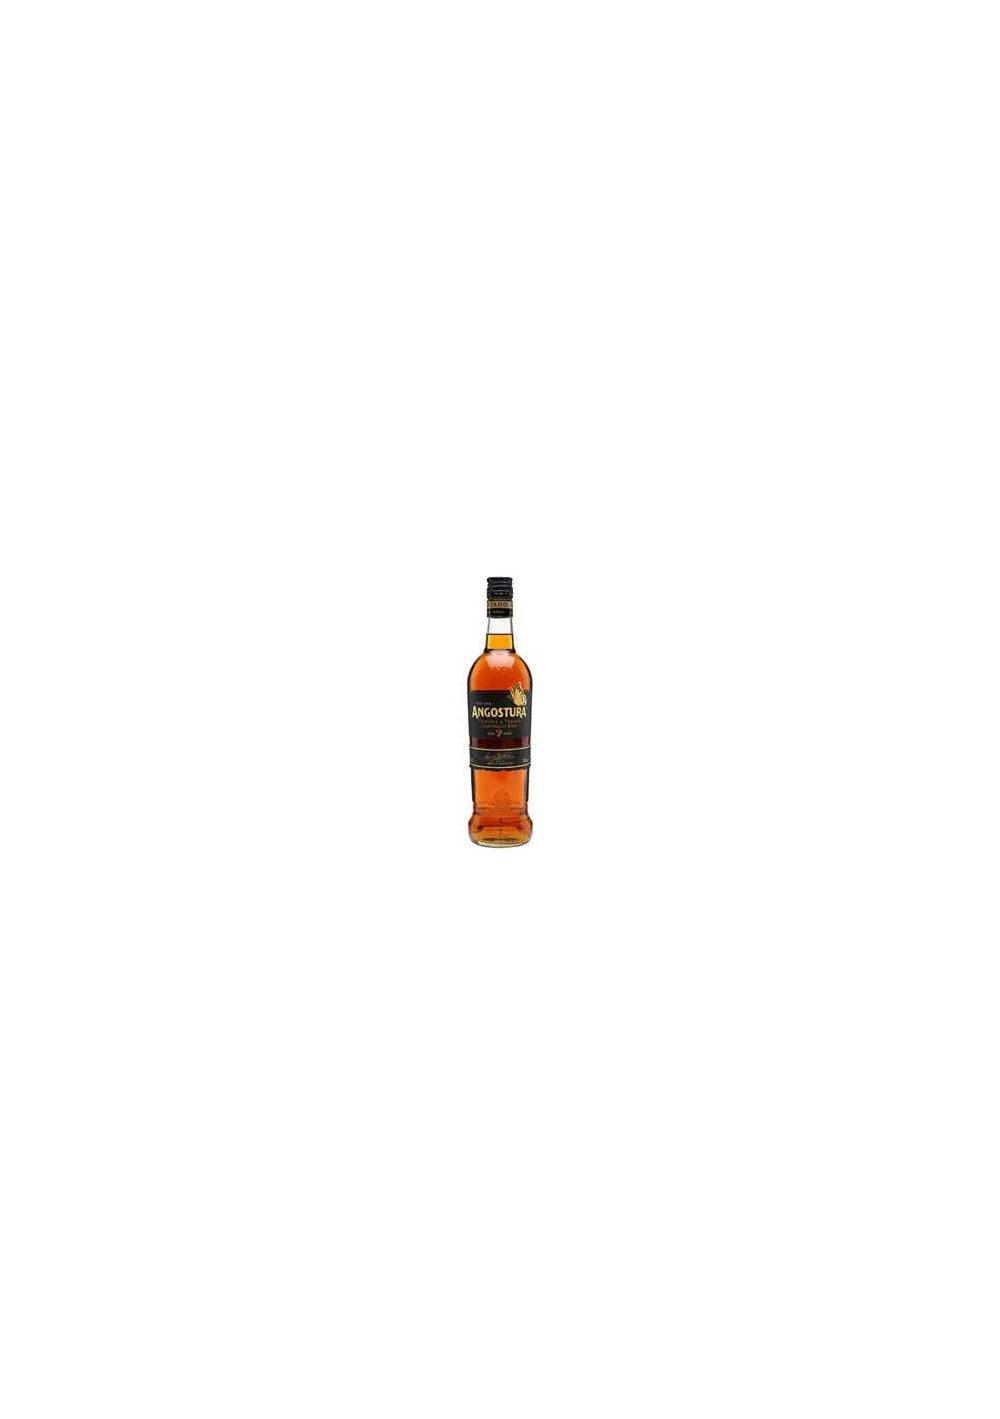 Rum Angostura - 7 years old - (70cl)